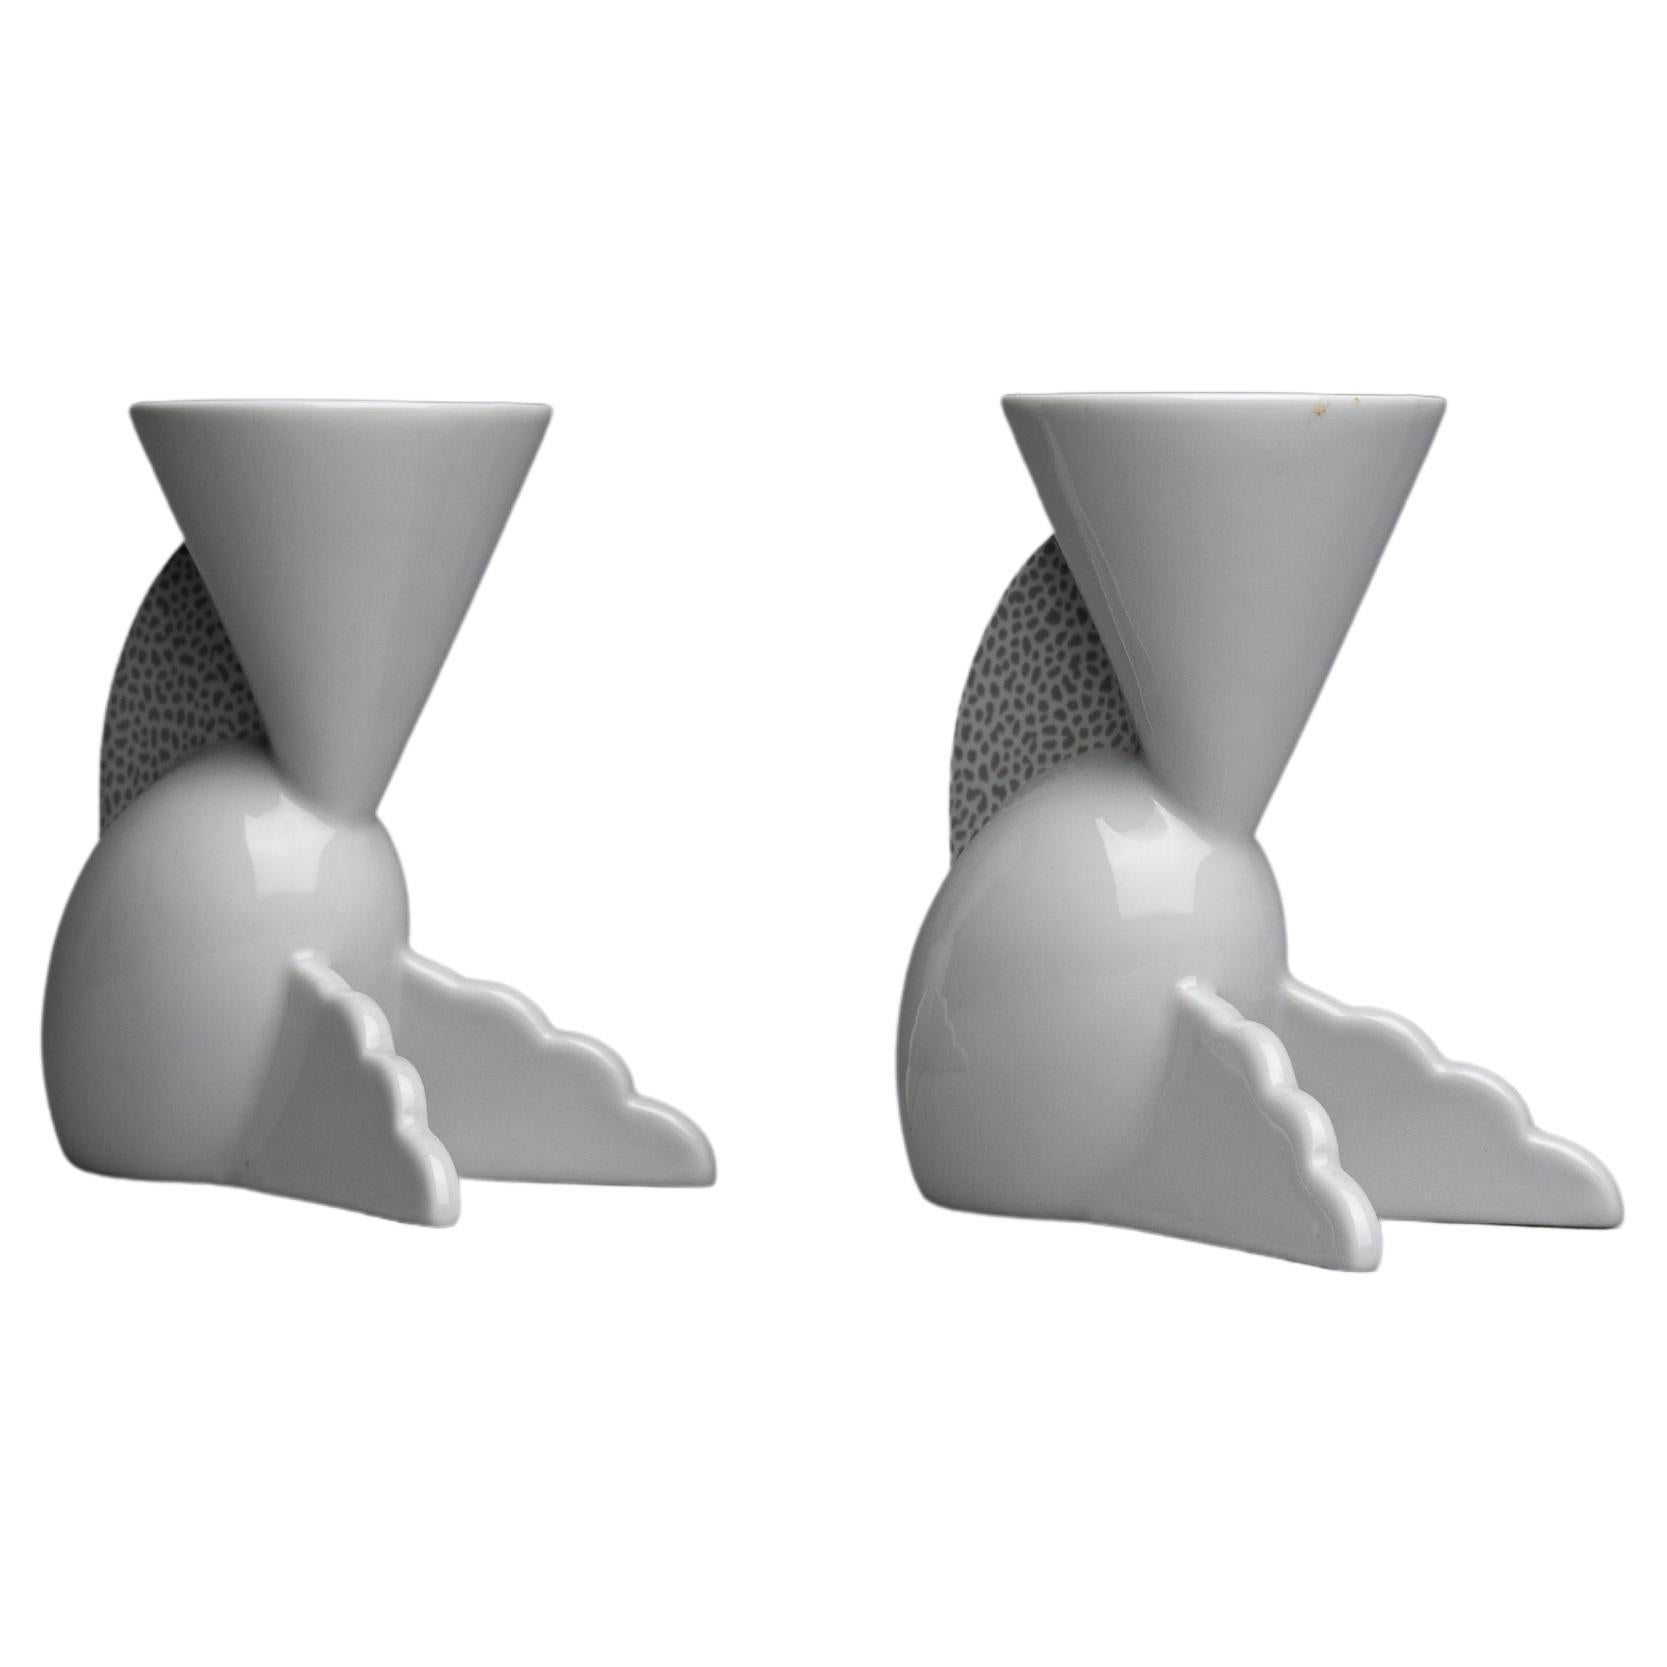 Matteo Thun Memphis Milano Pair of 'Onega' Cocktail Cups For Sale